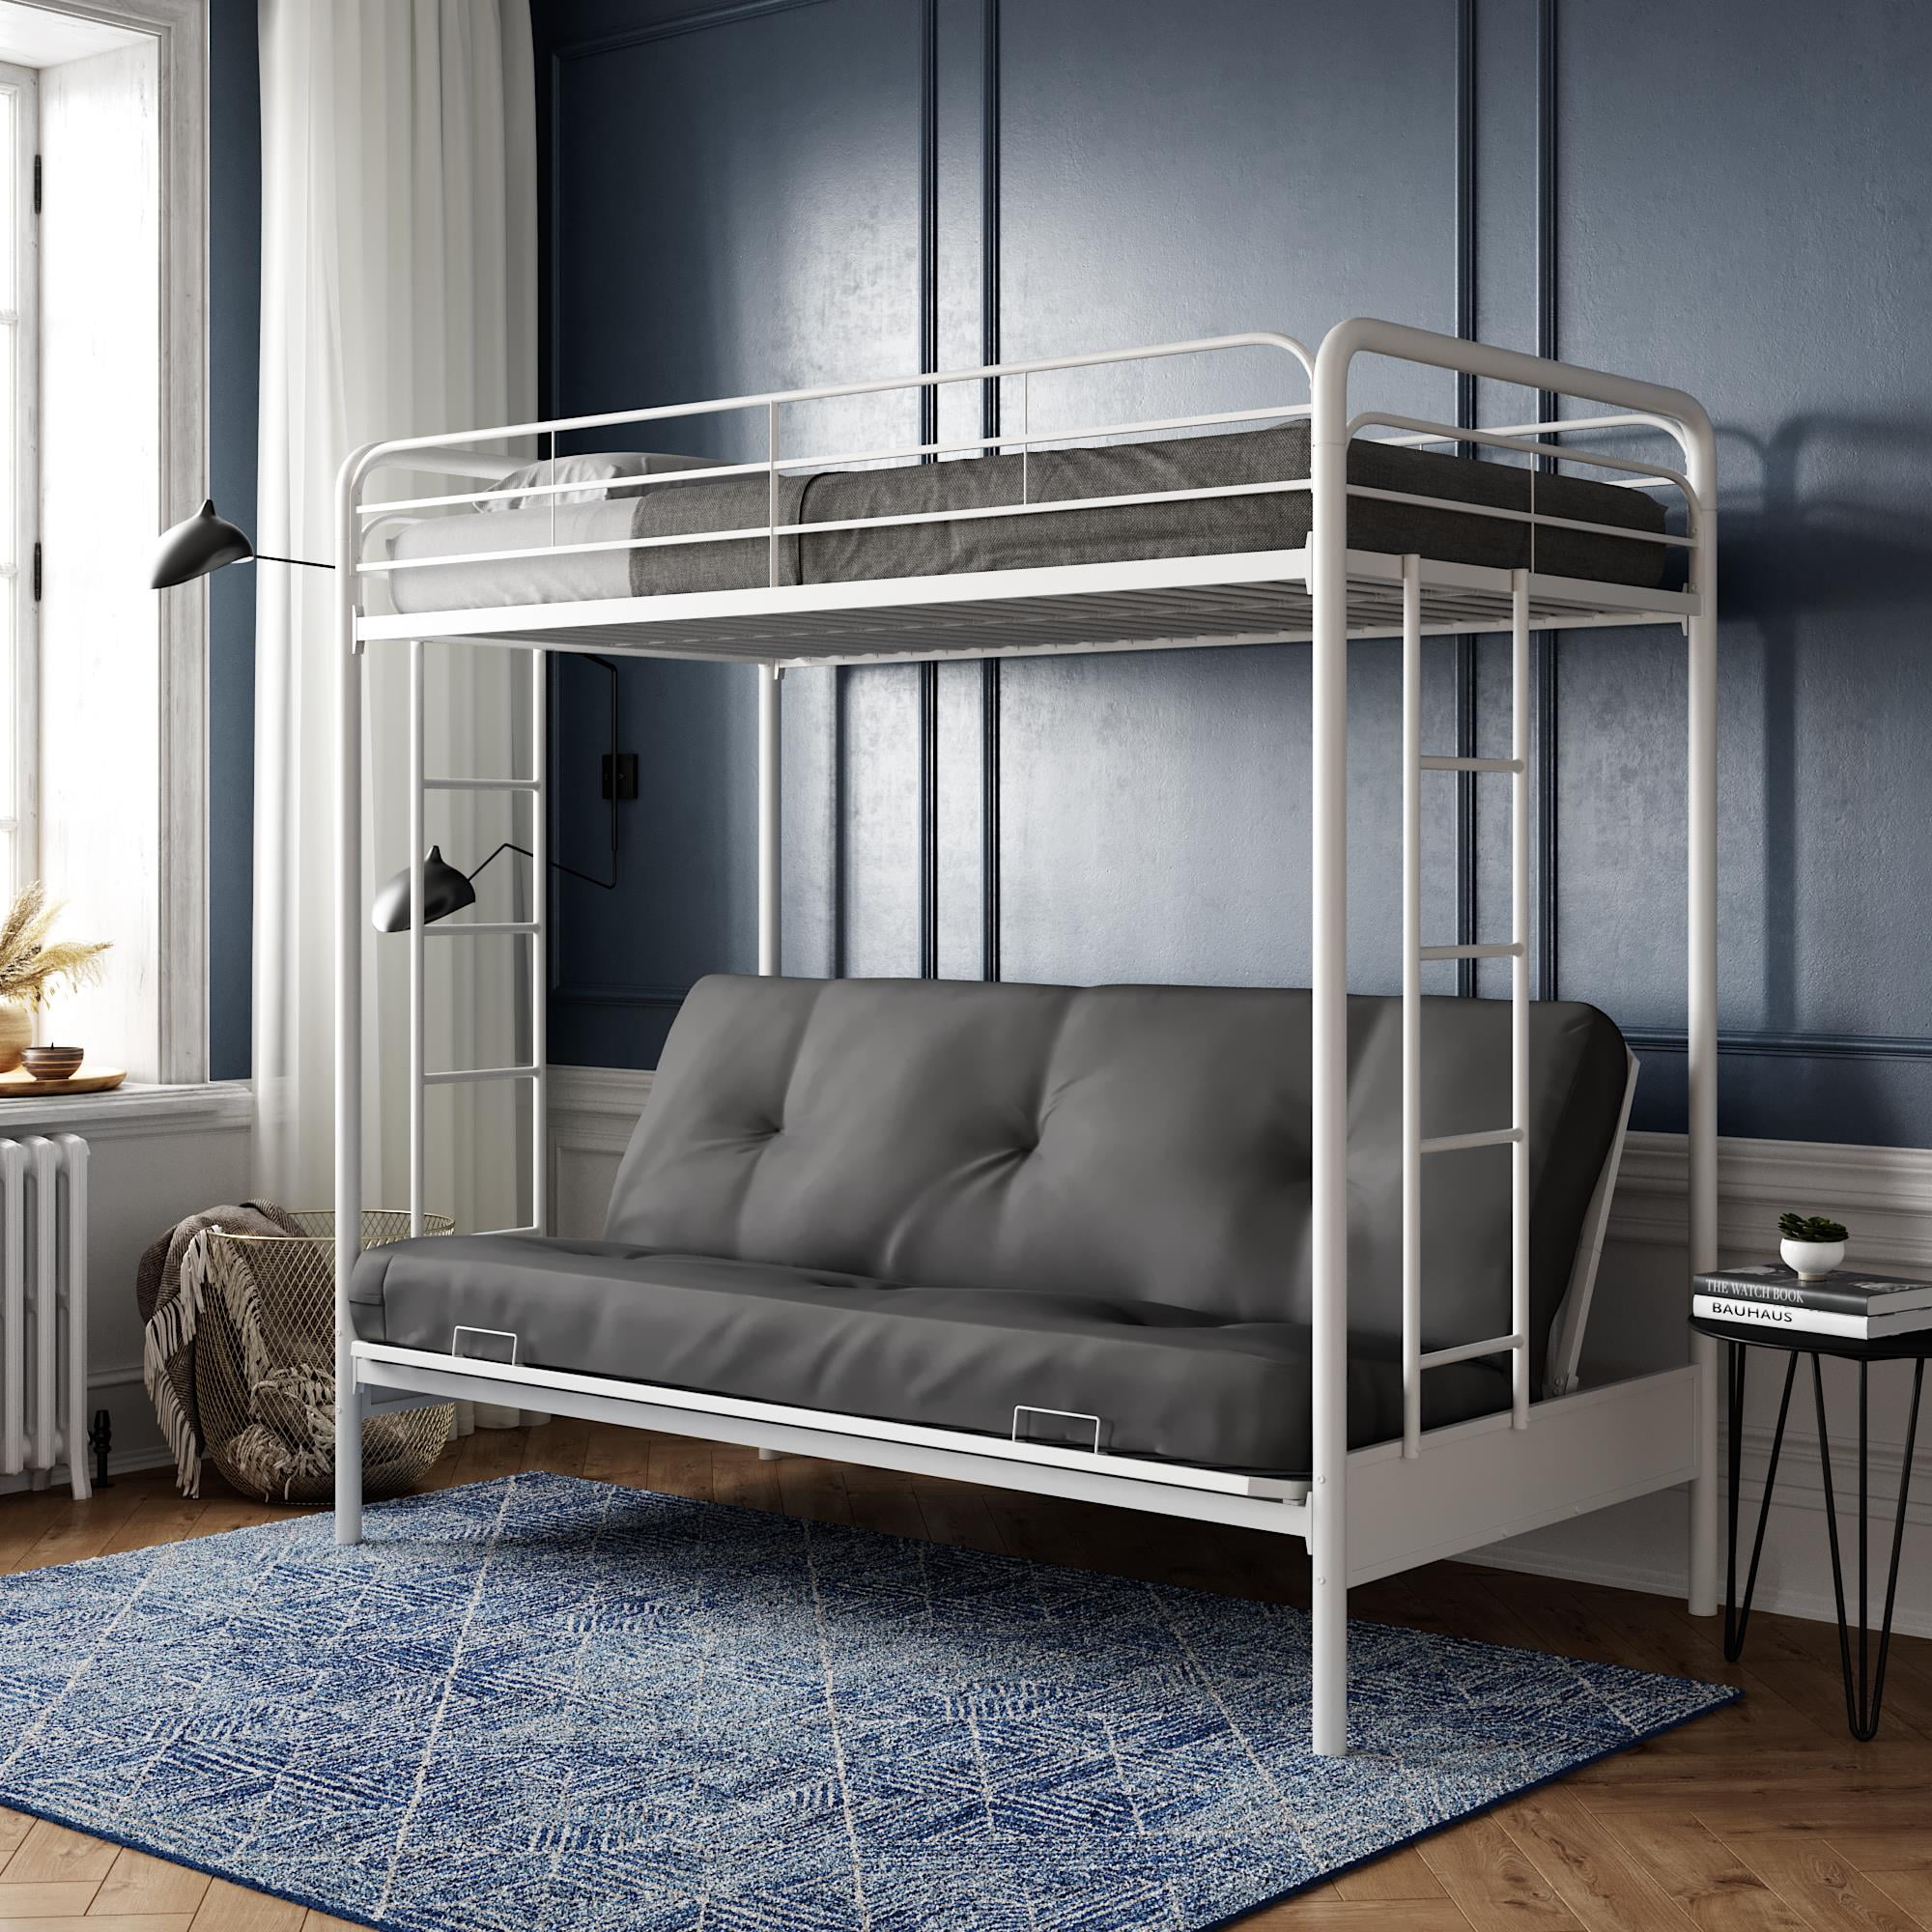 Dhp Twin Over Futon Metal Bunk Bed, Futon Bunk Bed With Mattress